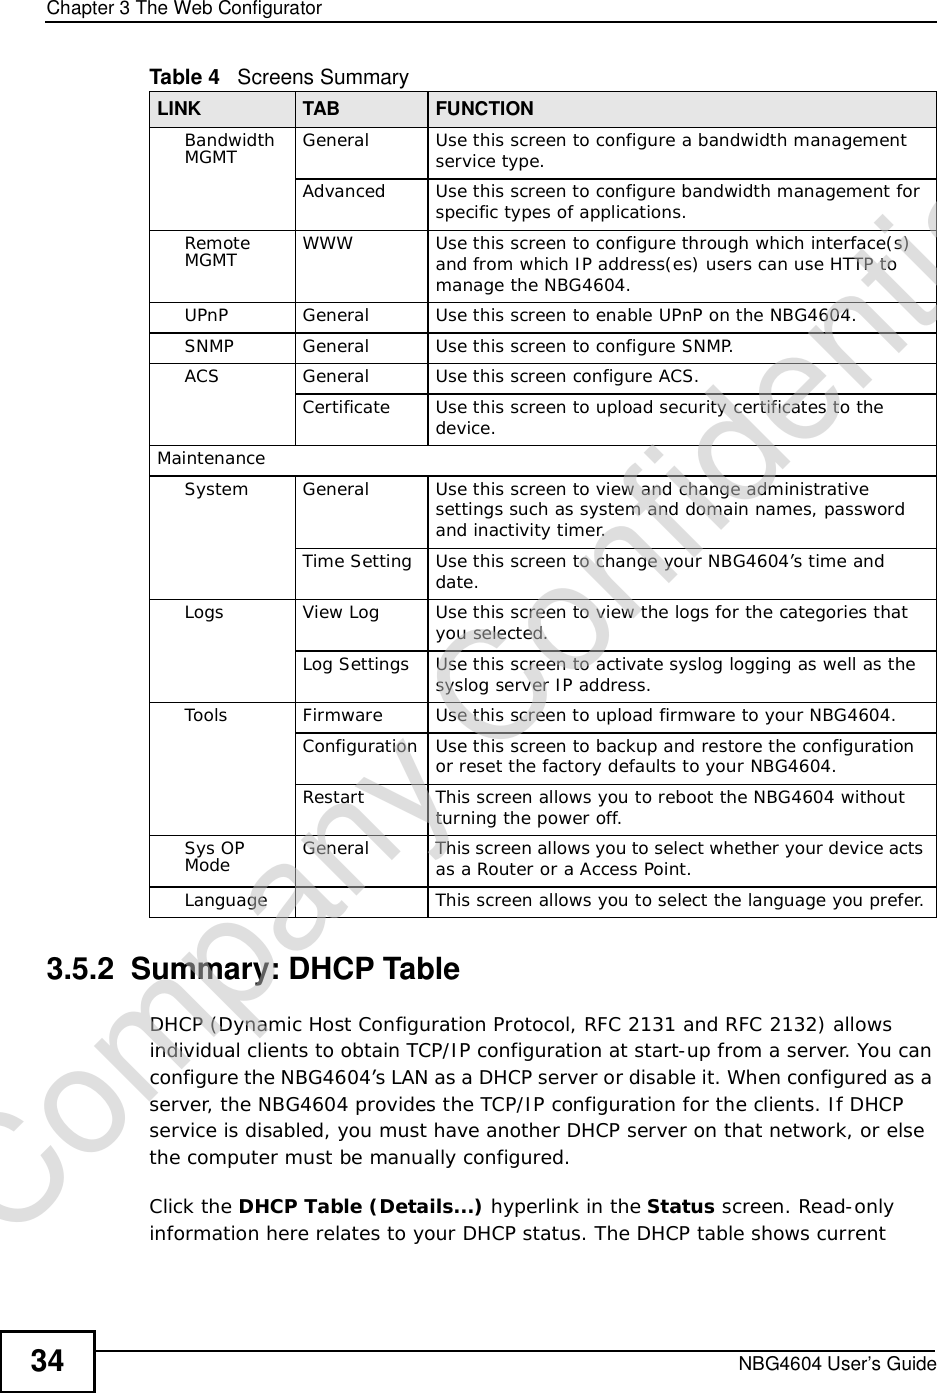 Chapter 3The Web ConfiguratorNBG4604 User’s Guide343.5.2  Summary: DHCP Table    DHCP (Dynamic Host Configuration Protocol, RFC 2131 and RFC 2132) allows individual clients to obtain TCP/IP configuration at start-up from a server. You can configure the NBG4604’s LAN as a DHCP server or disable it. When configured as a server, the NBG4604 provides the TCP/IP configuration for the clients. If DHCP service is disabled, you must have another DHCP server on that network, or else the computer must be manually configured.Click the DHCP Table (Details...) hyperlink in the Status screen. Read-only information here relates to your DHCP status. The DHCP table shows current Bandwidth MGMT General Use this screen to configure a bandwidth management service type.Advanced Use this screen to configure bandwidth management for specific types of applications.Remote MGMT WWW Use this screen to configure through which interface(s) and from which IP address(es) users can use HTTP to manage the NBG4604.UPnP General Use this screen to enable UPnP on the NBG4604. SNMP General Use this screen to configure SNMP.ACS General Use this screen configure ACS.Certificate Use this screen to upload security certificates to the device.MaintenanceSystem General Use this screen to view and change administrative settings such as system and domain names, password and inactivity timer.Time Setting Use this screen to change your NBG4604’s time and date.Logs View Log Use this screen to view the logs for the categories that you selected.Log Settings Use this screen to activate syslog logging as well as the syslog server IP address.Tools Firmware Use this screen to upload firmware to your NBG4604.Configuration Use this screen to backup and restore the configuration or reset the factory defaults to your NBG4604. Restart This screen allows you to reboot the NBG4604 without turning the power off.Sys OP Mode General This screen allows you to select whether your device acts as a Router or a Access Point.Language This screen allows you to select the language you prefer.Table 4   Screens SummaryLINK TAB FUNCTIONCompany Confidential